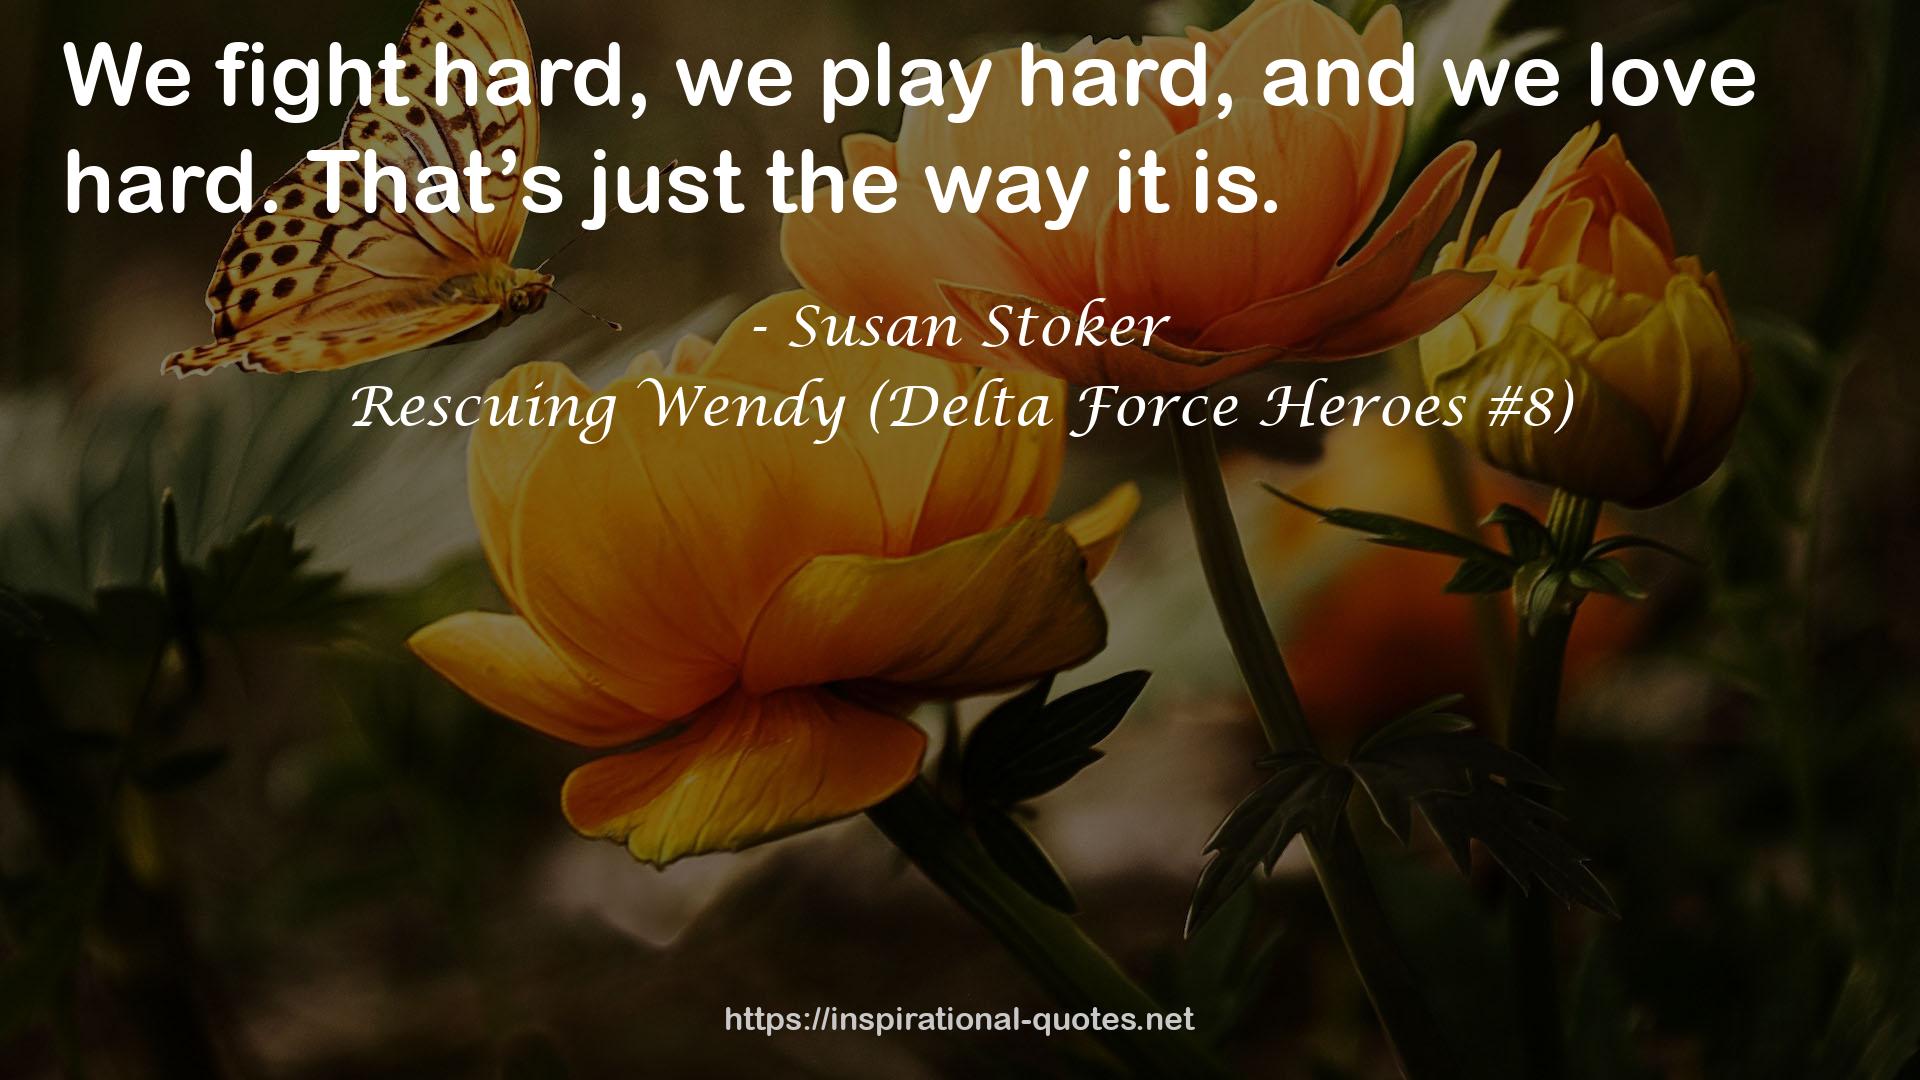 Rescuing Wendy (Delta Force Heroes #8) QUOTES